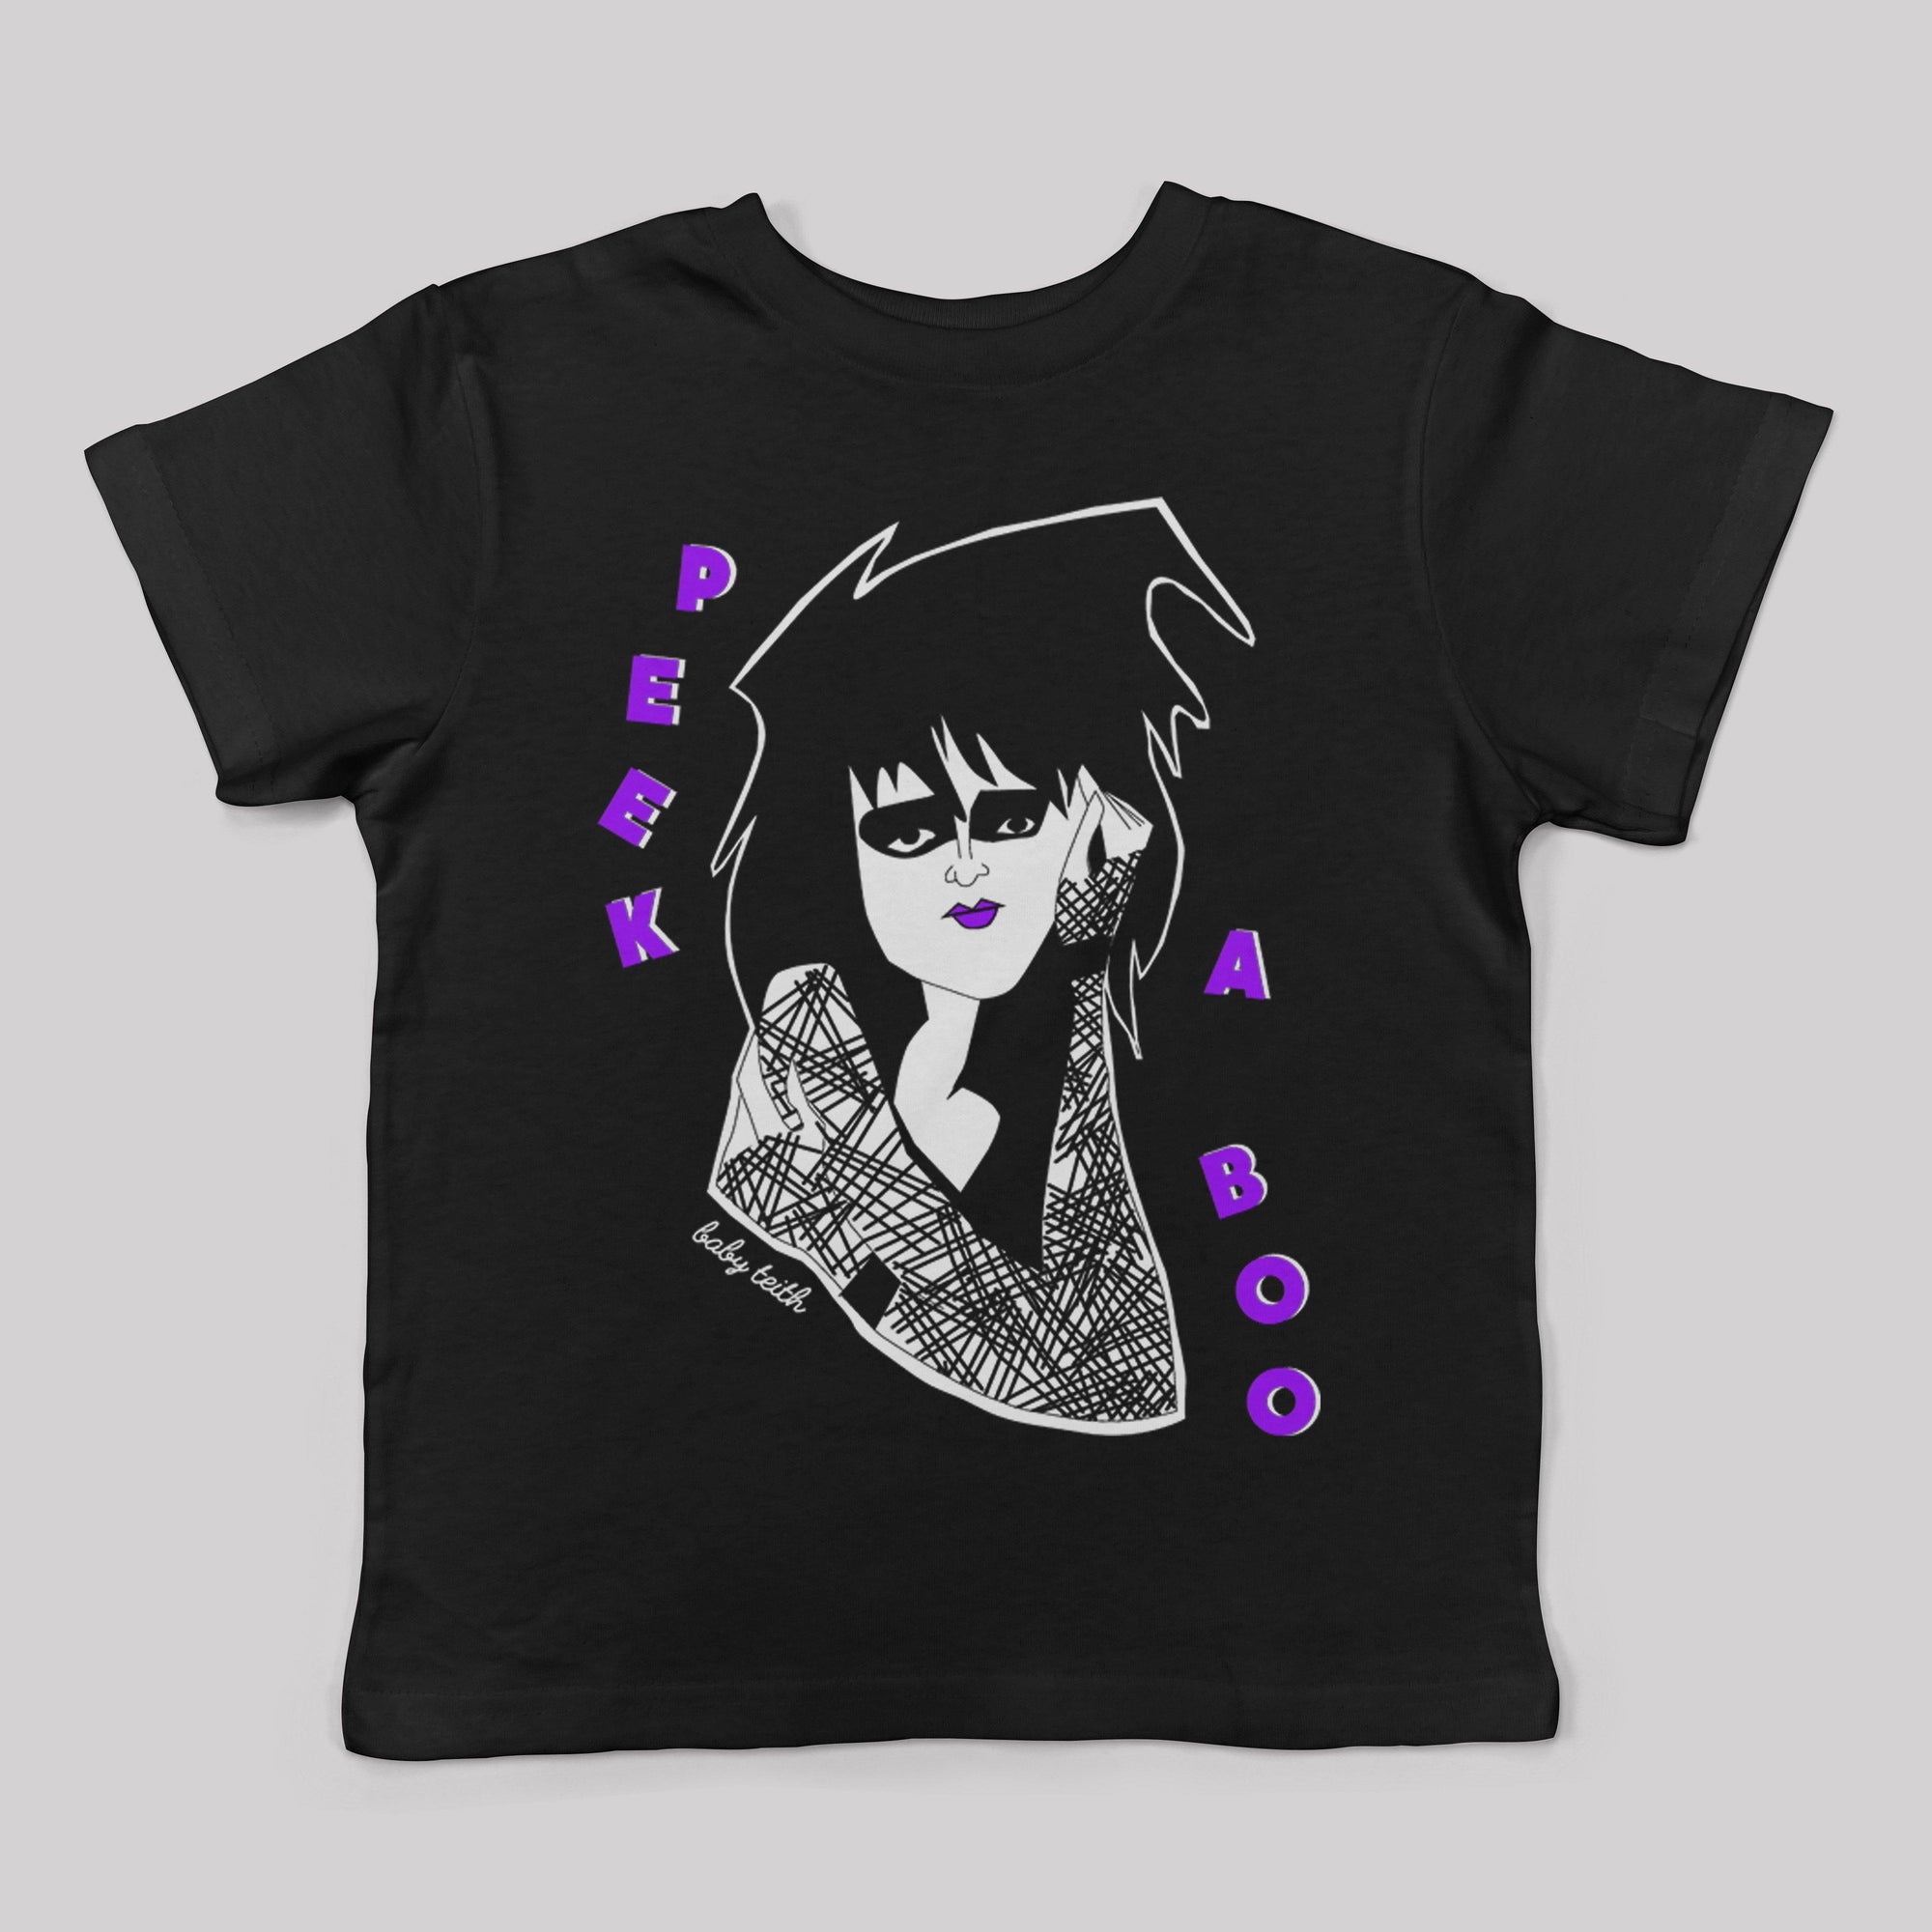 "Peek-a-boo" Siouxsie Sioux Inspired Tee for Kids - Baby Teith